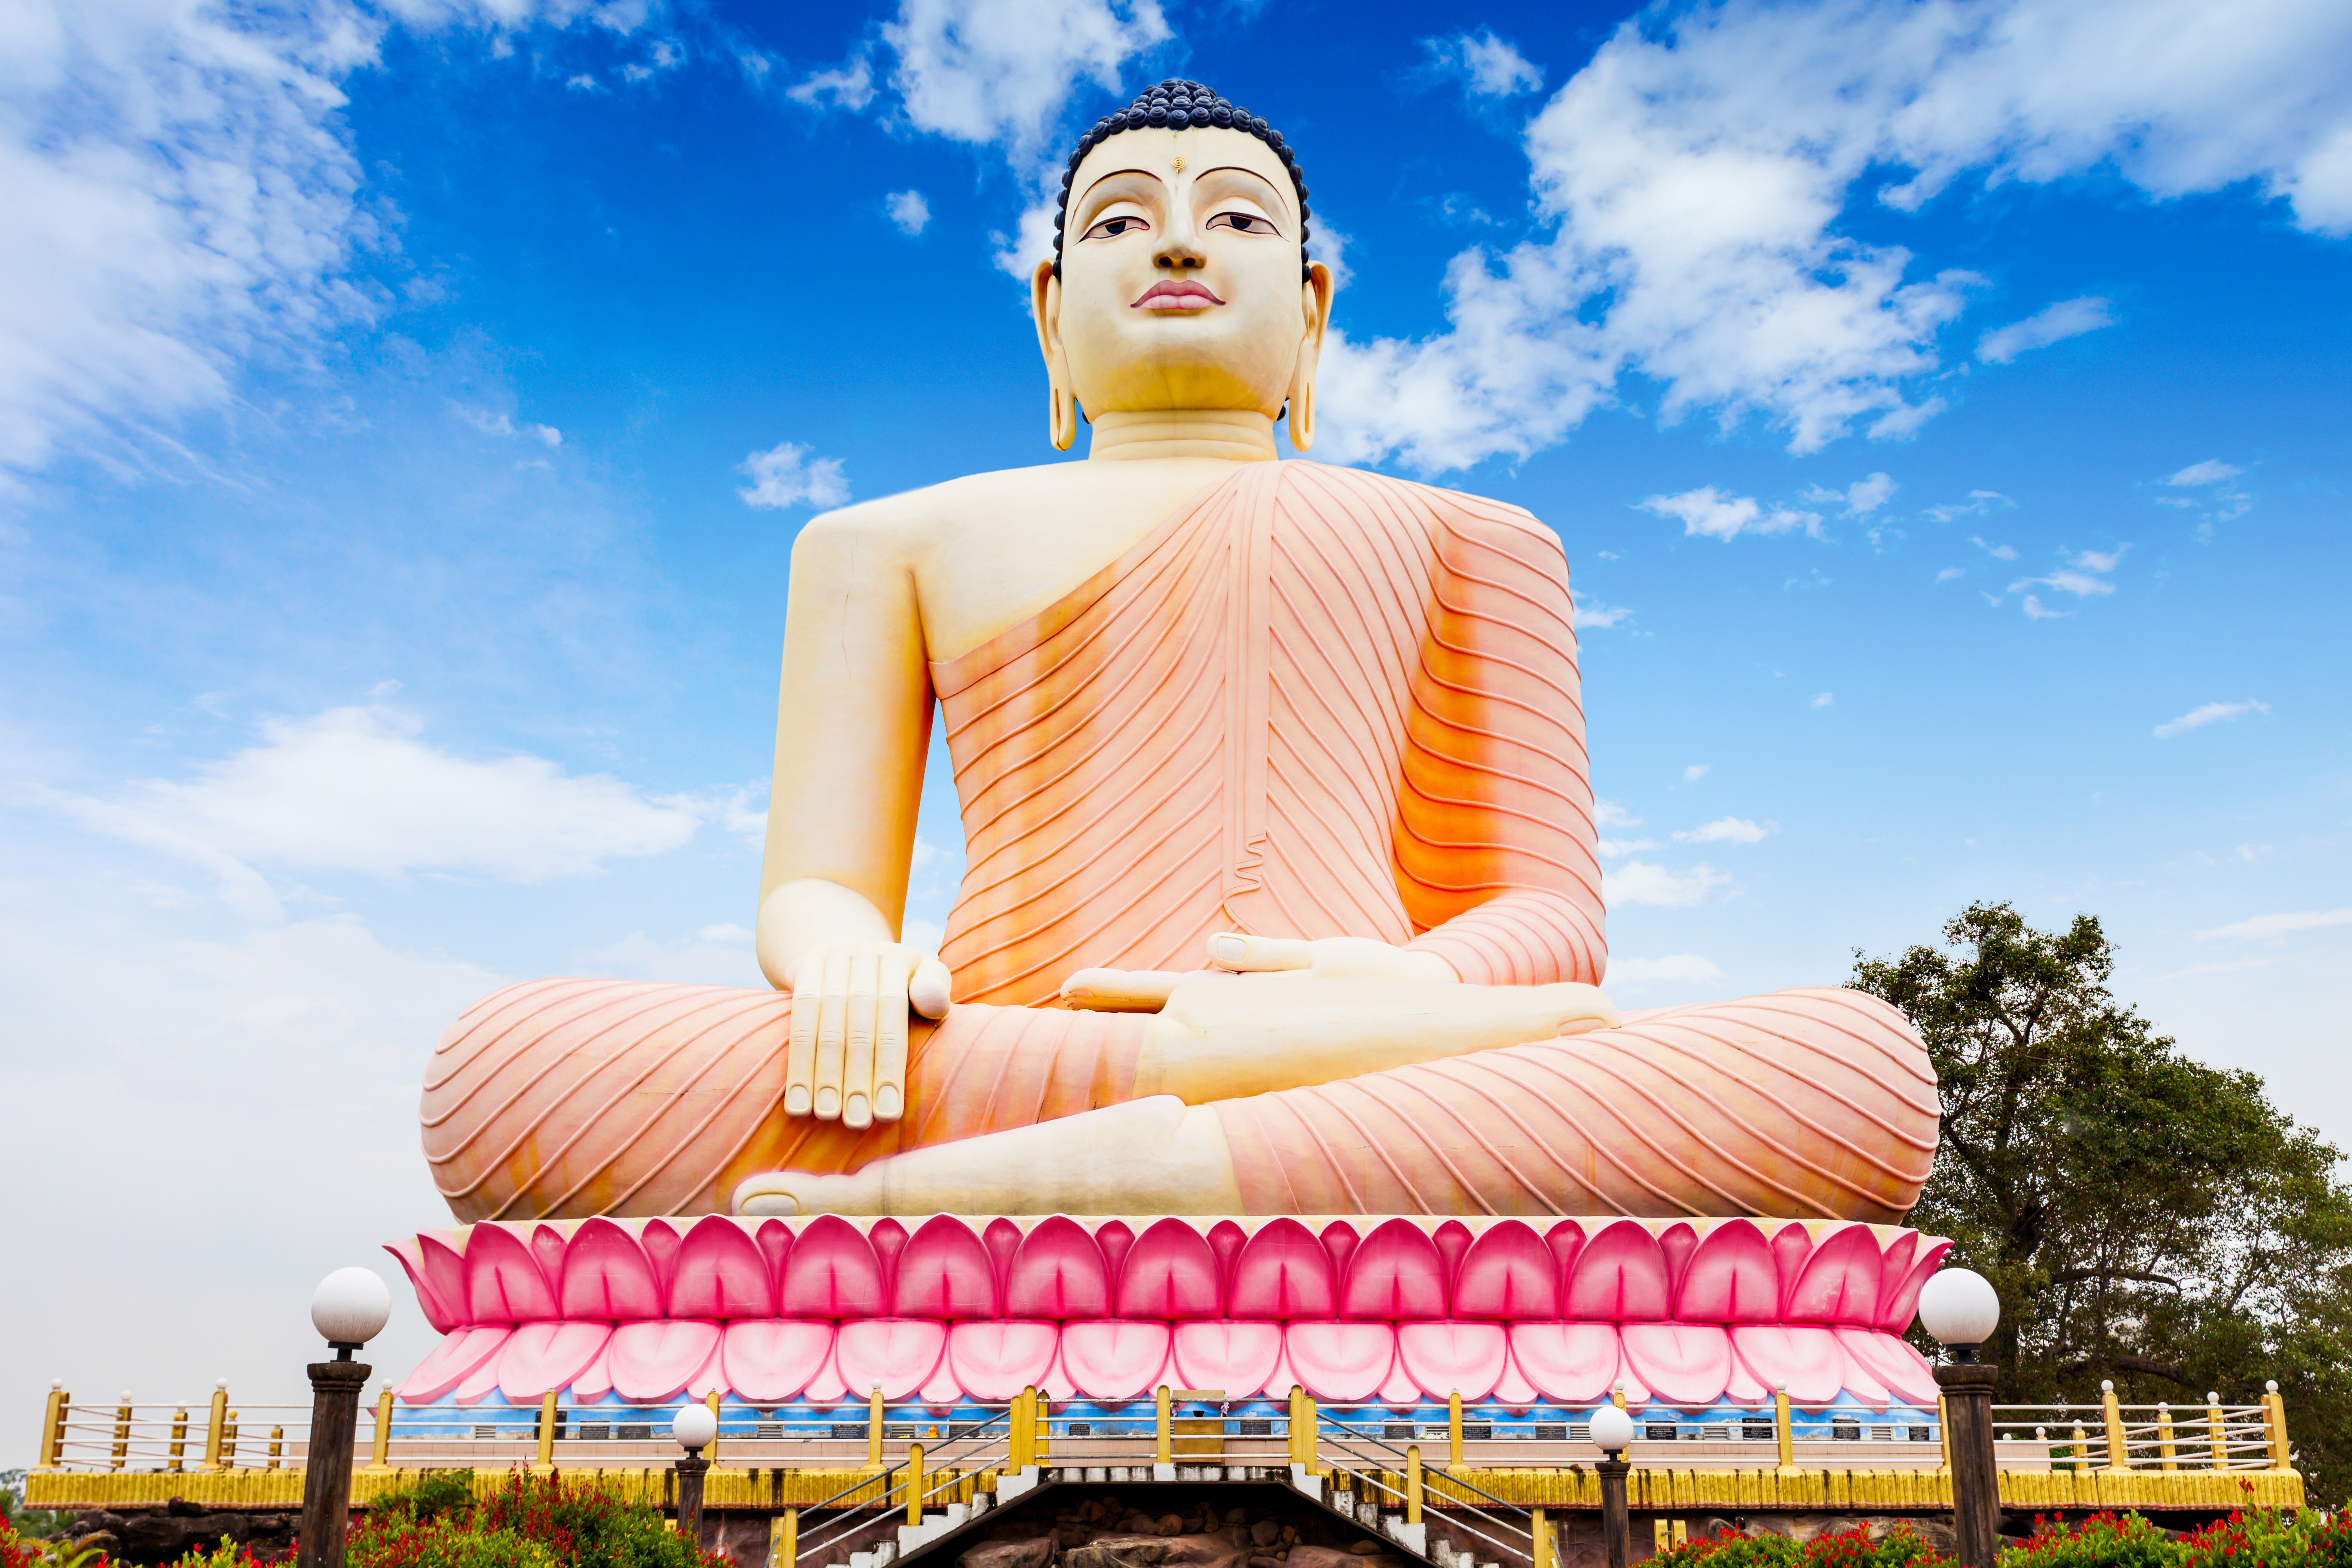 The huge sitting Buddha statue at the Kande Viharaya Temple 
in the ­village of Aluthgama